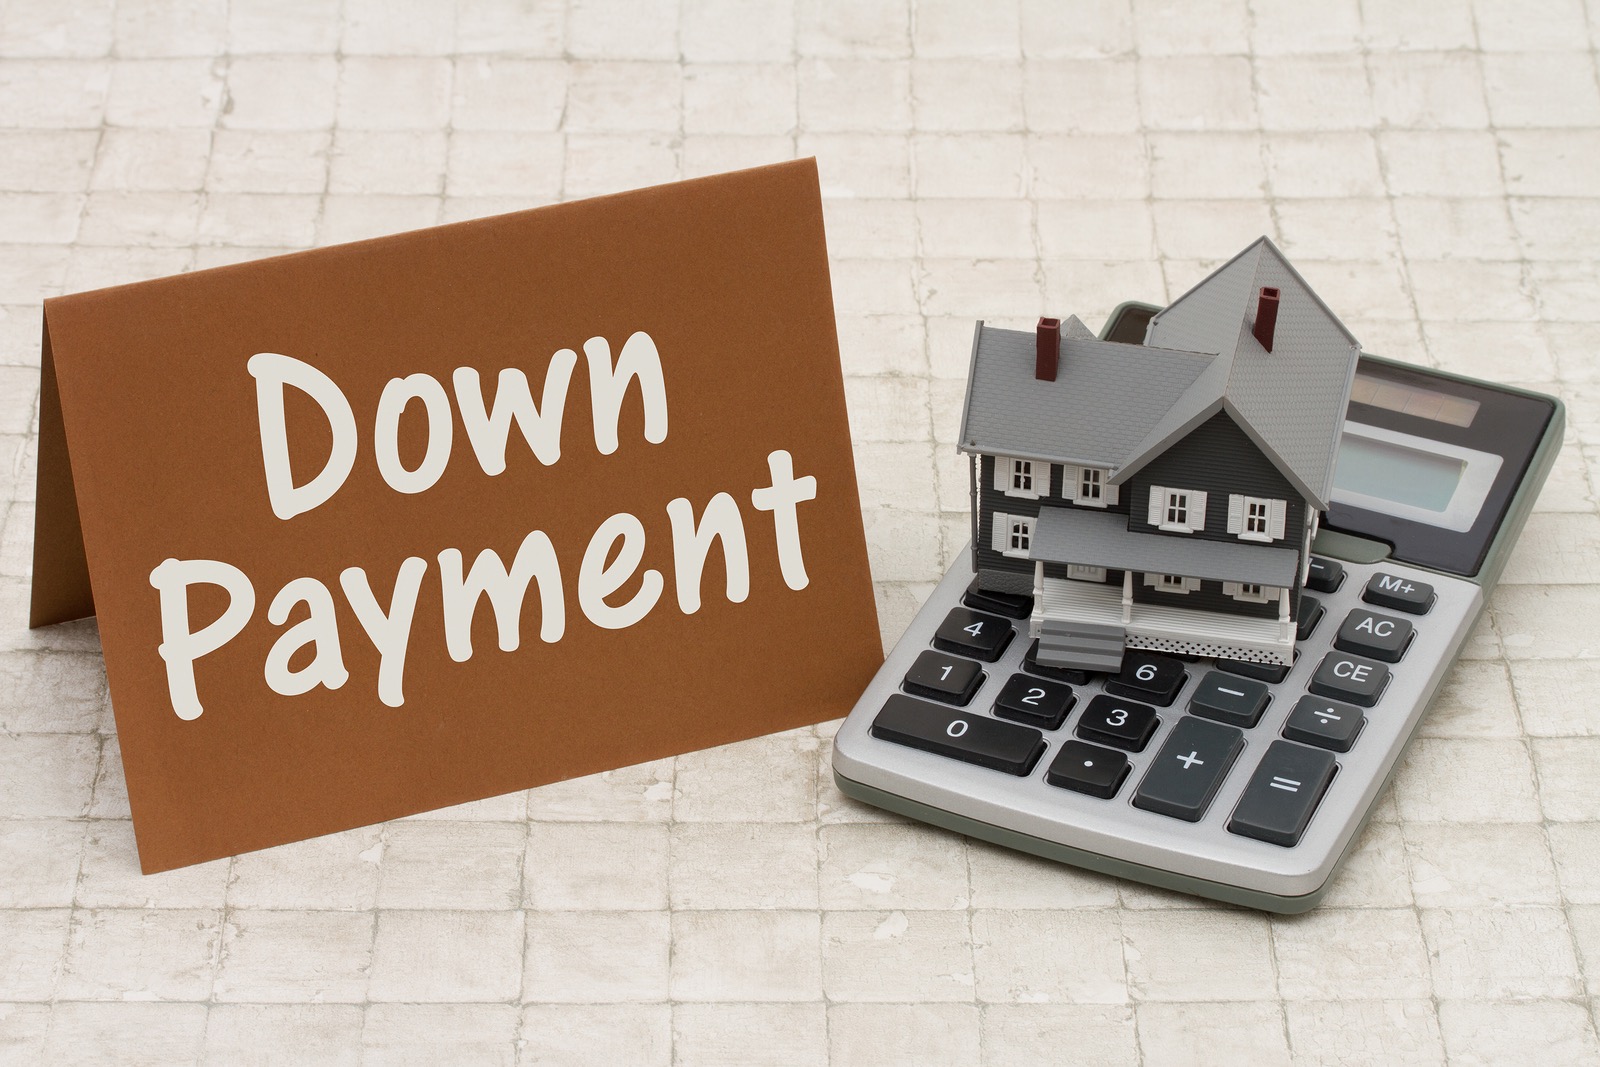 Sell My House New Jersey | We Buy Houses New Jersey | Essential Things You Must Know About Down Payment